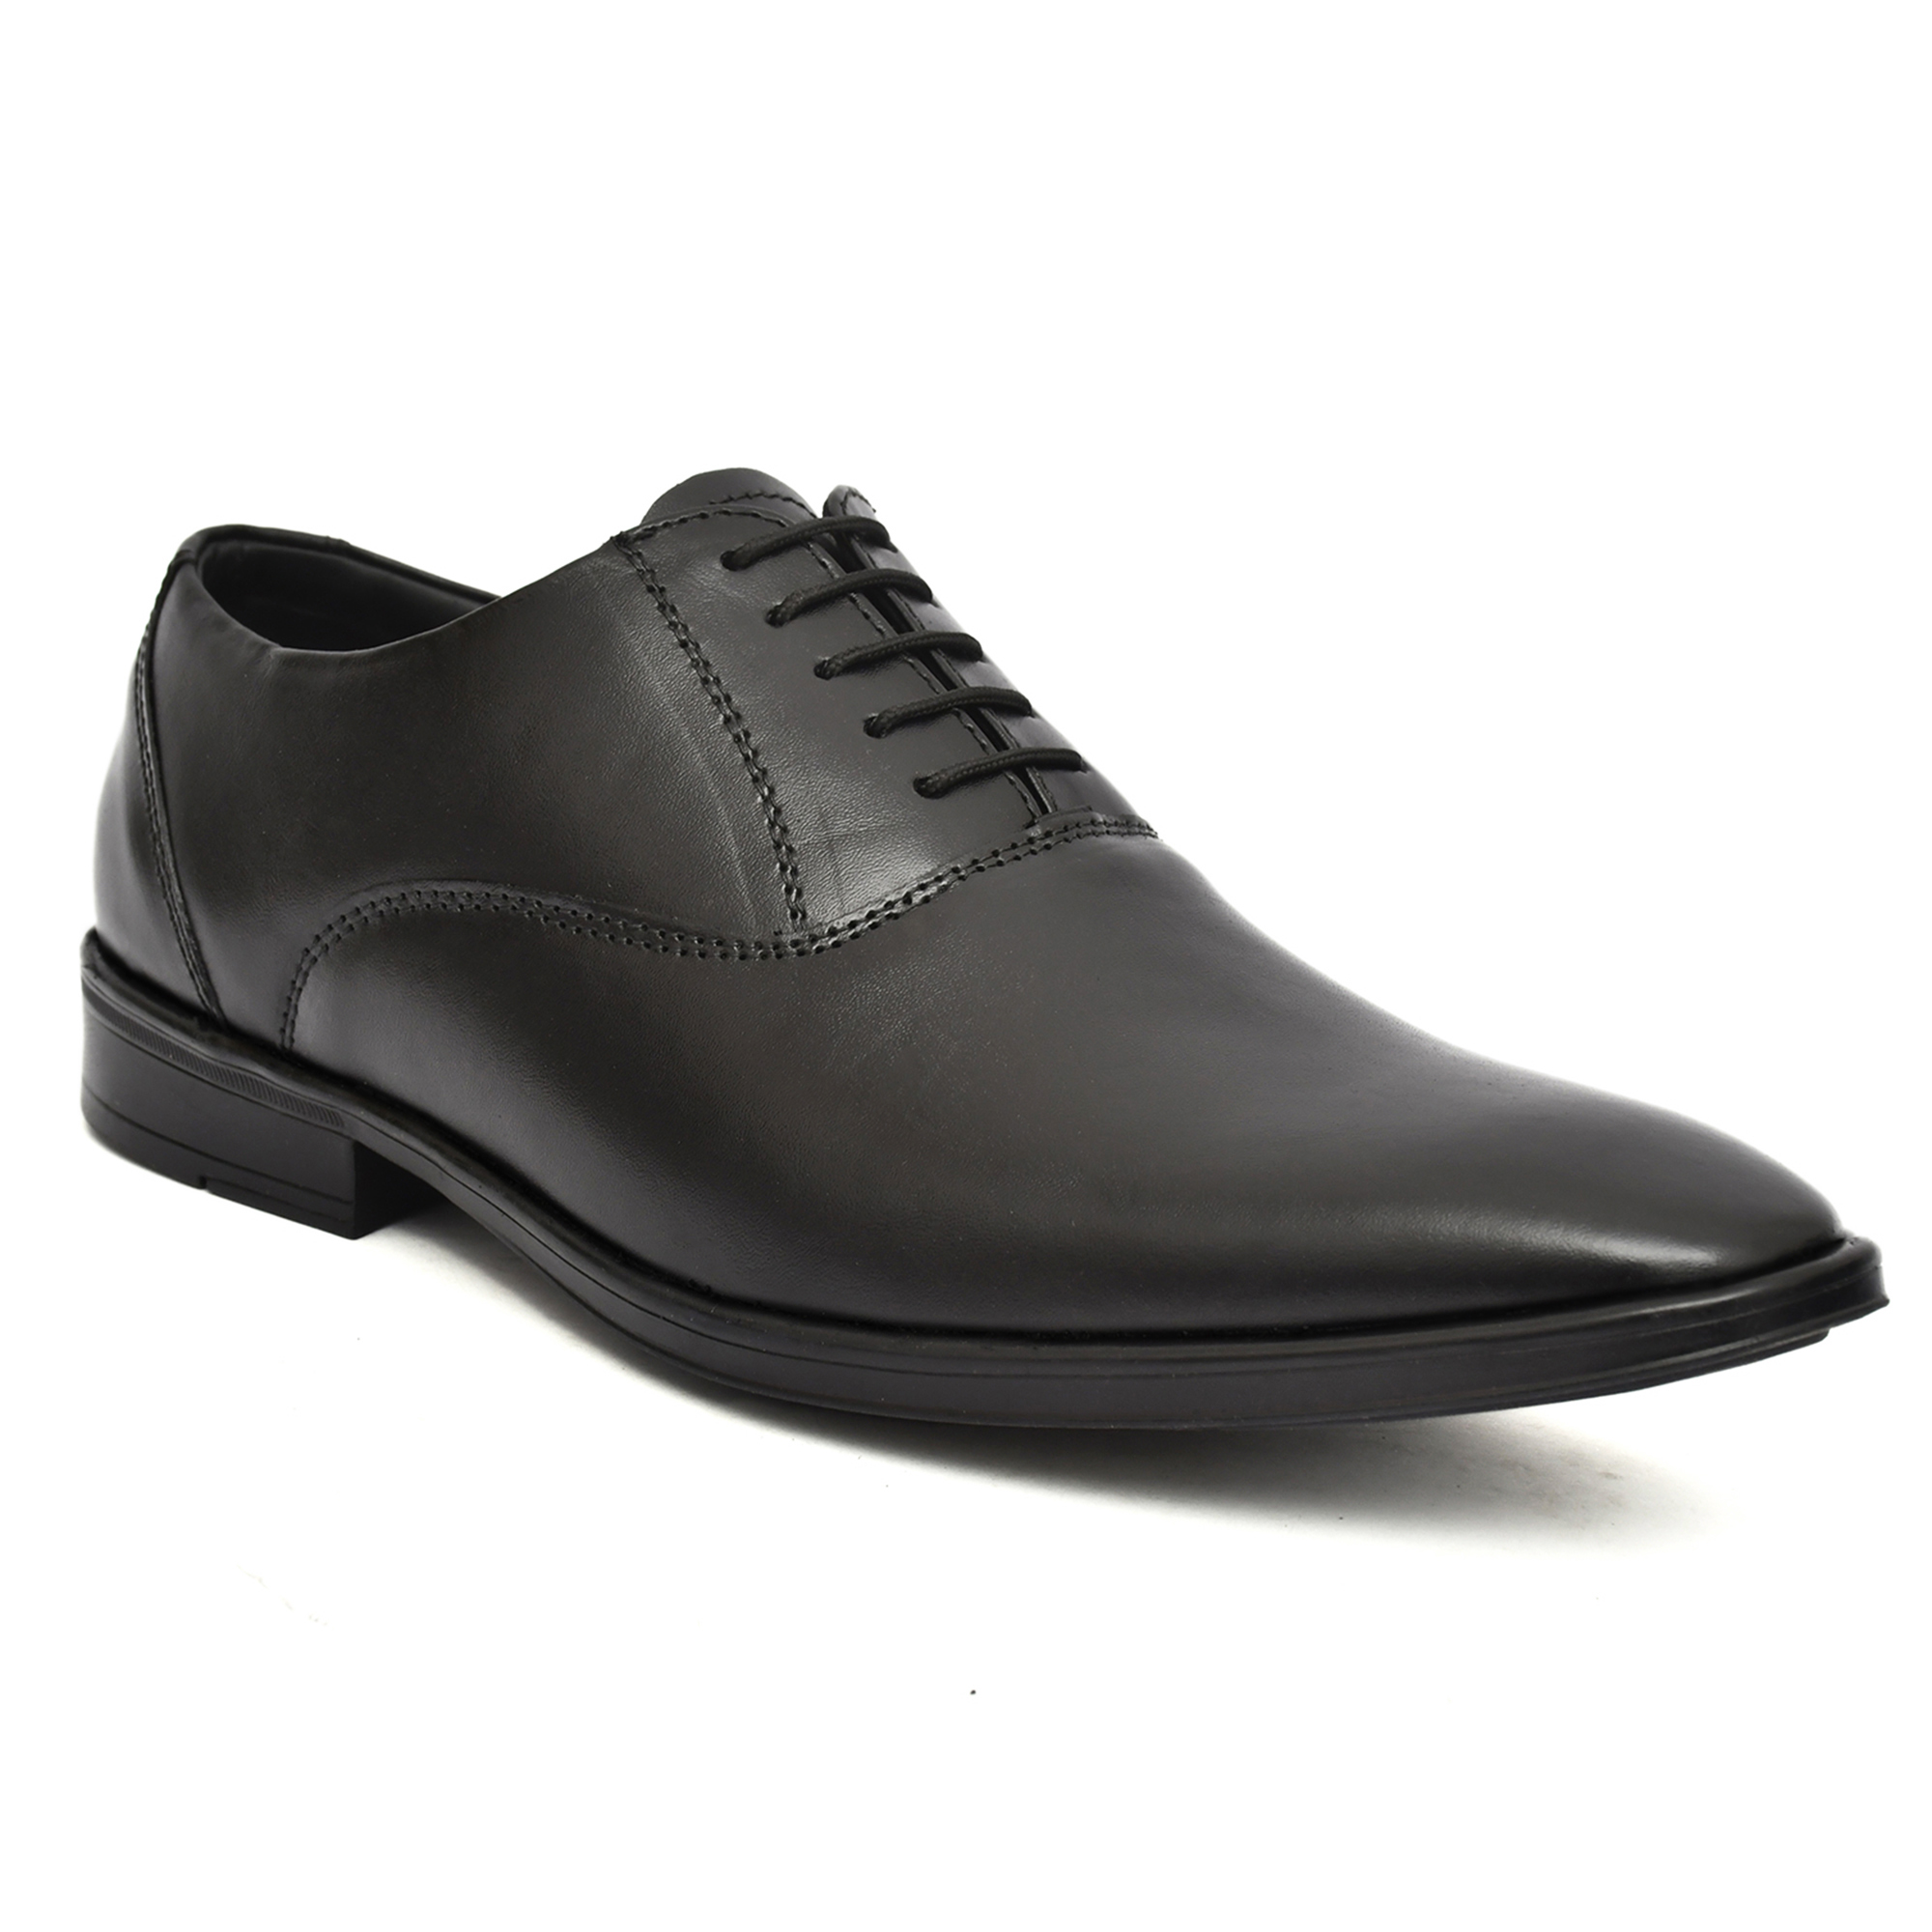 Leather Derby Shoes for men with Memory foam footpad. Article : AL04-Black